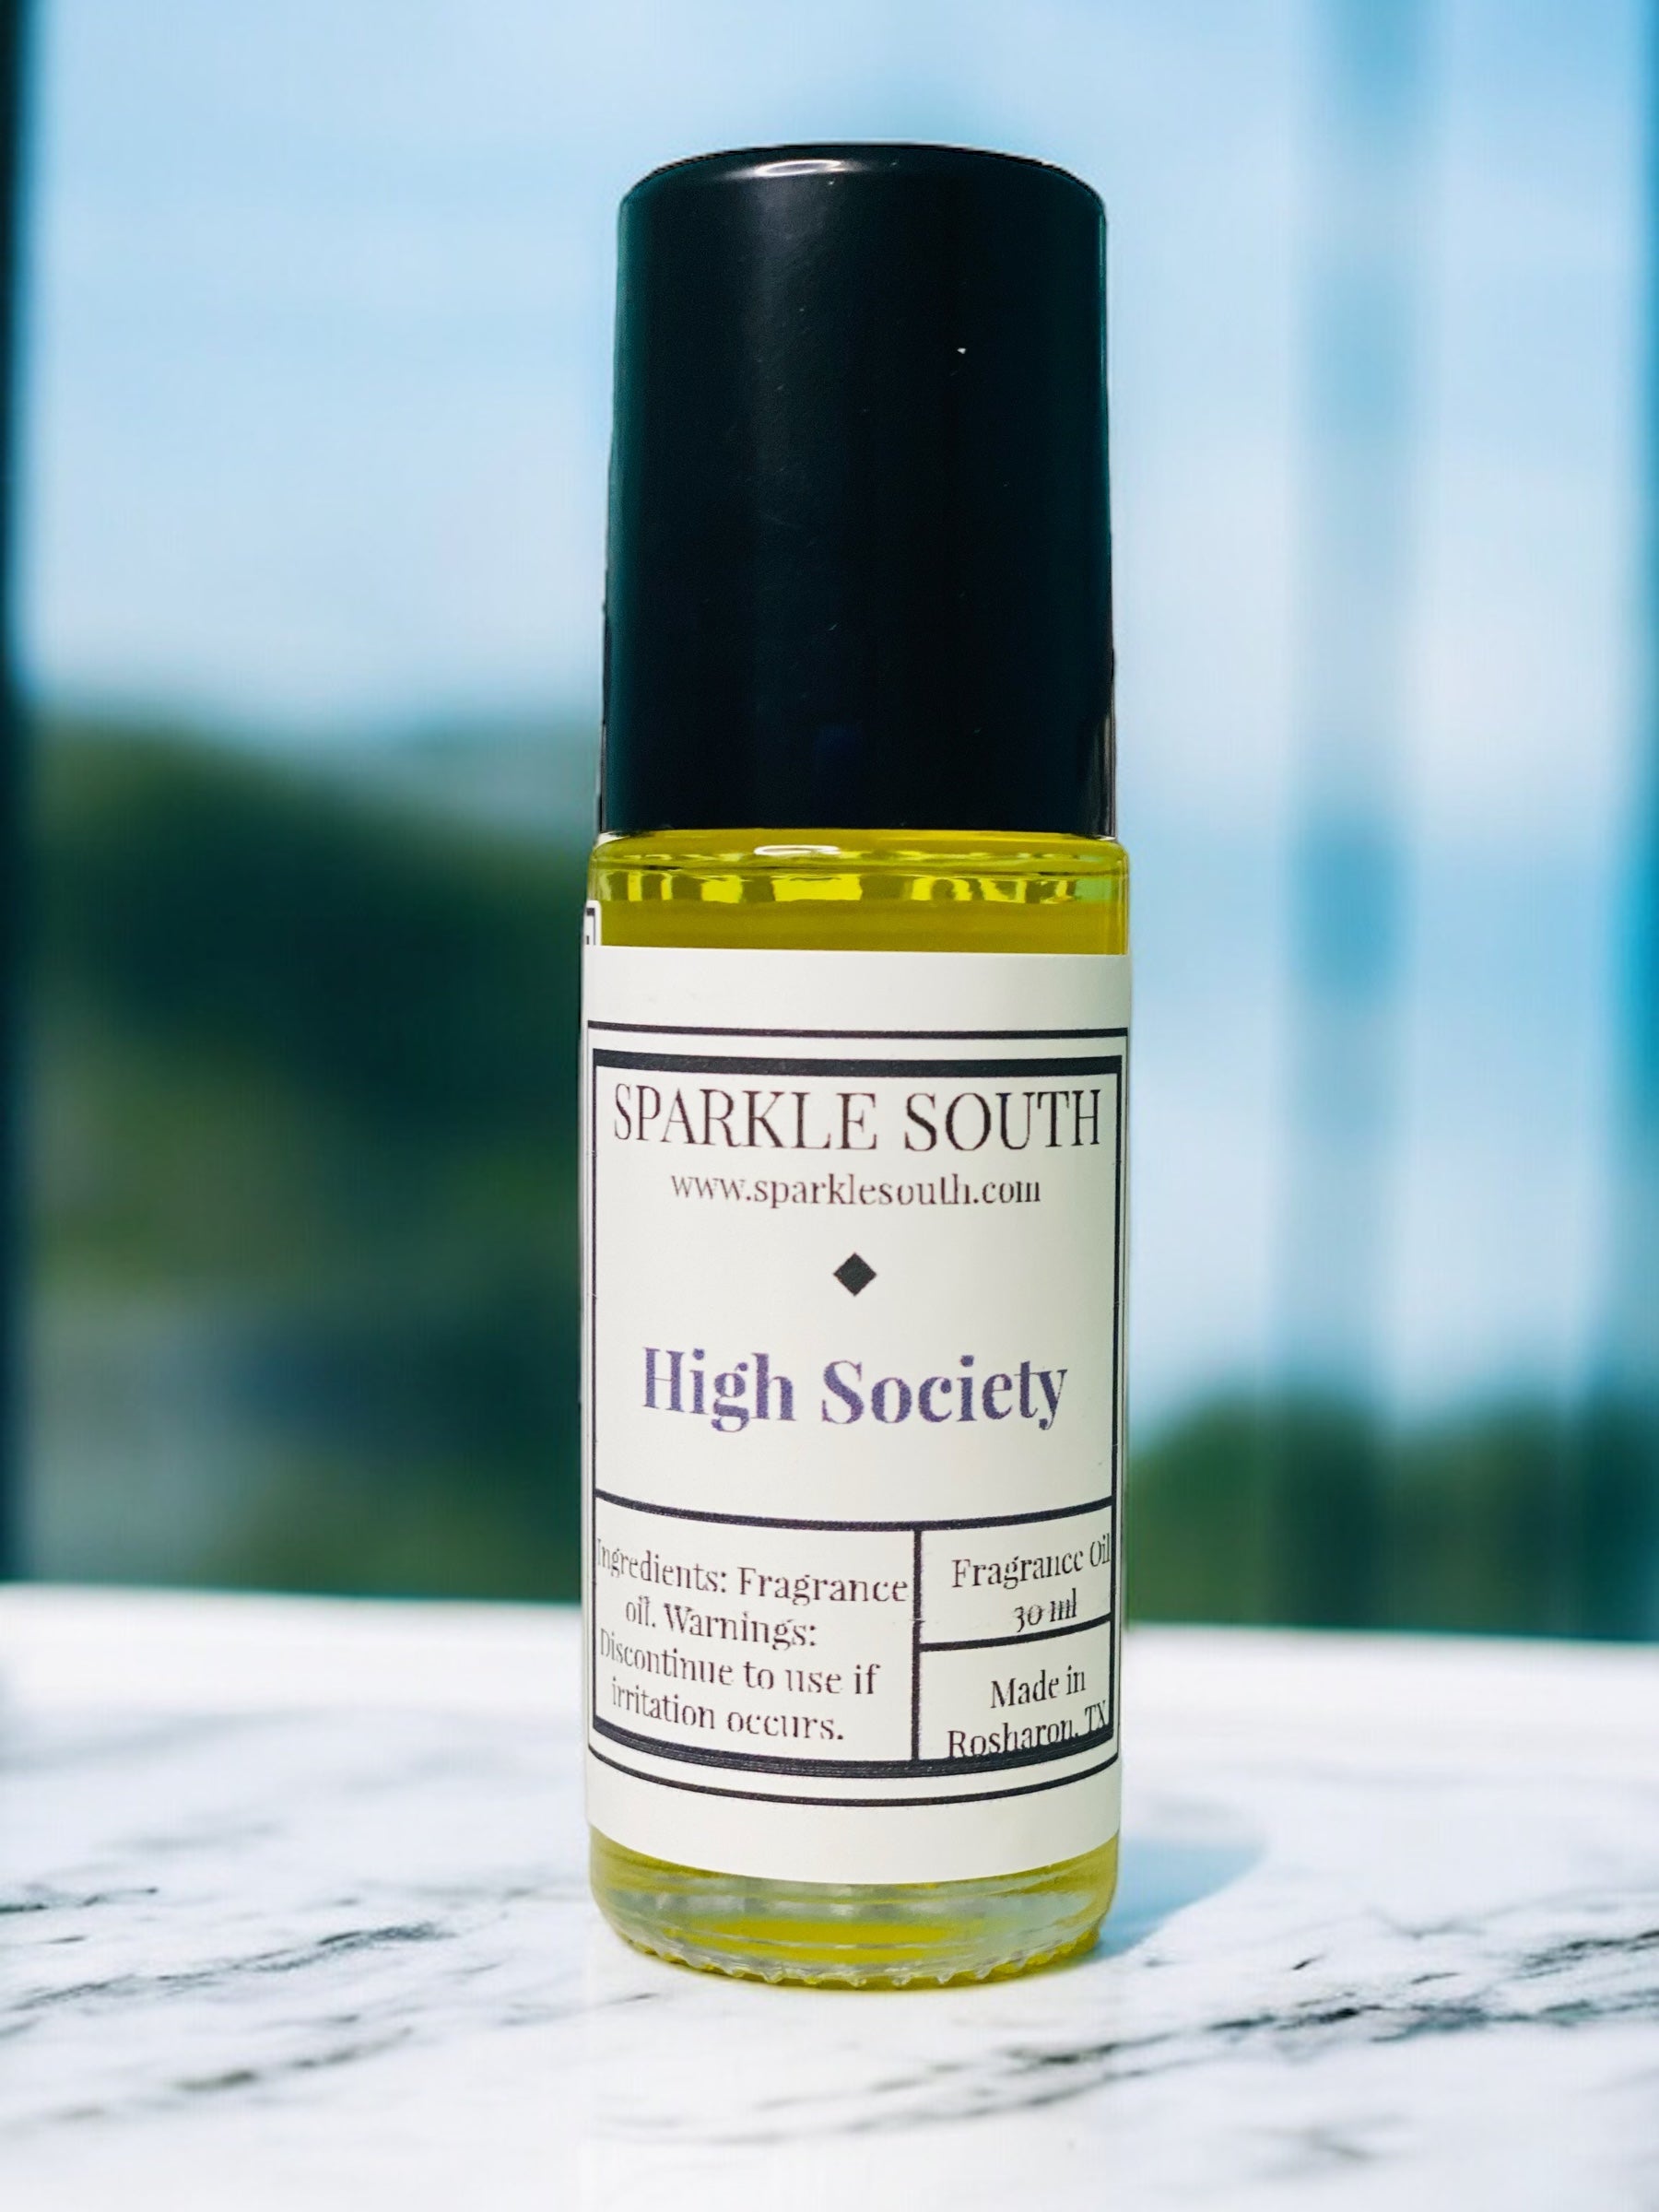 High Society inspired by Libre. 30 ml fragrance oil